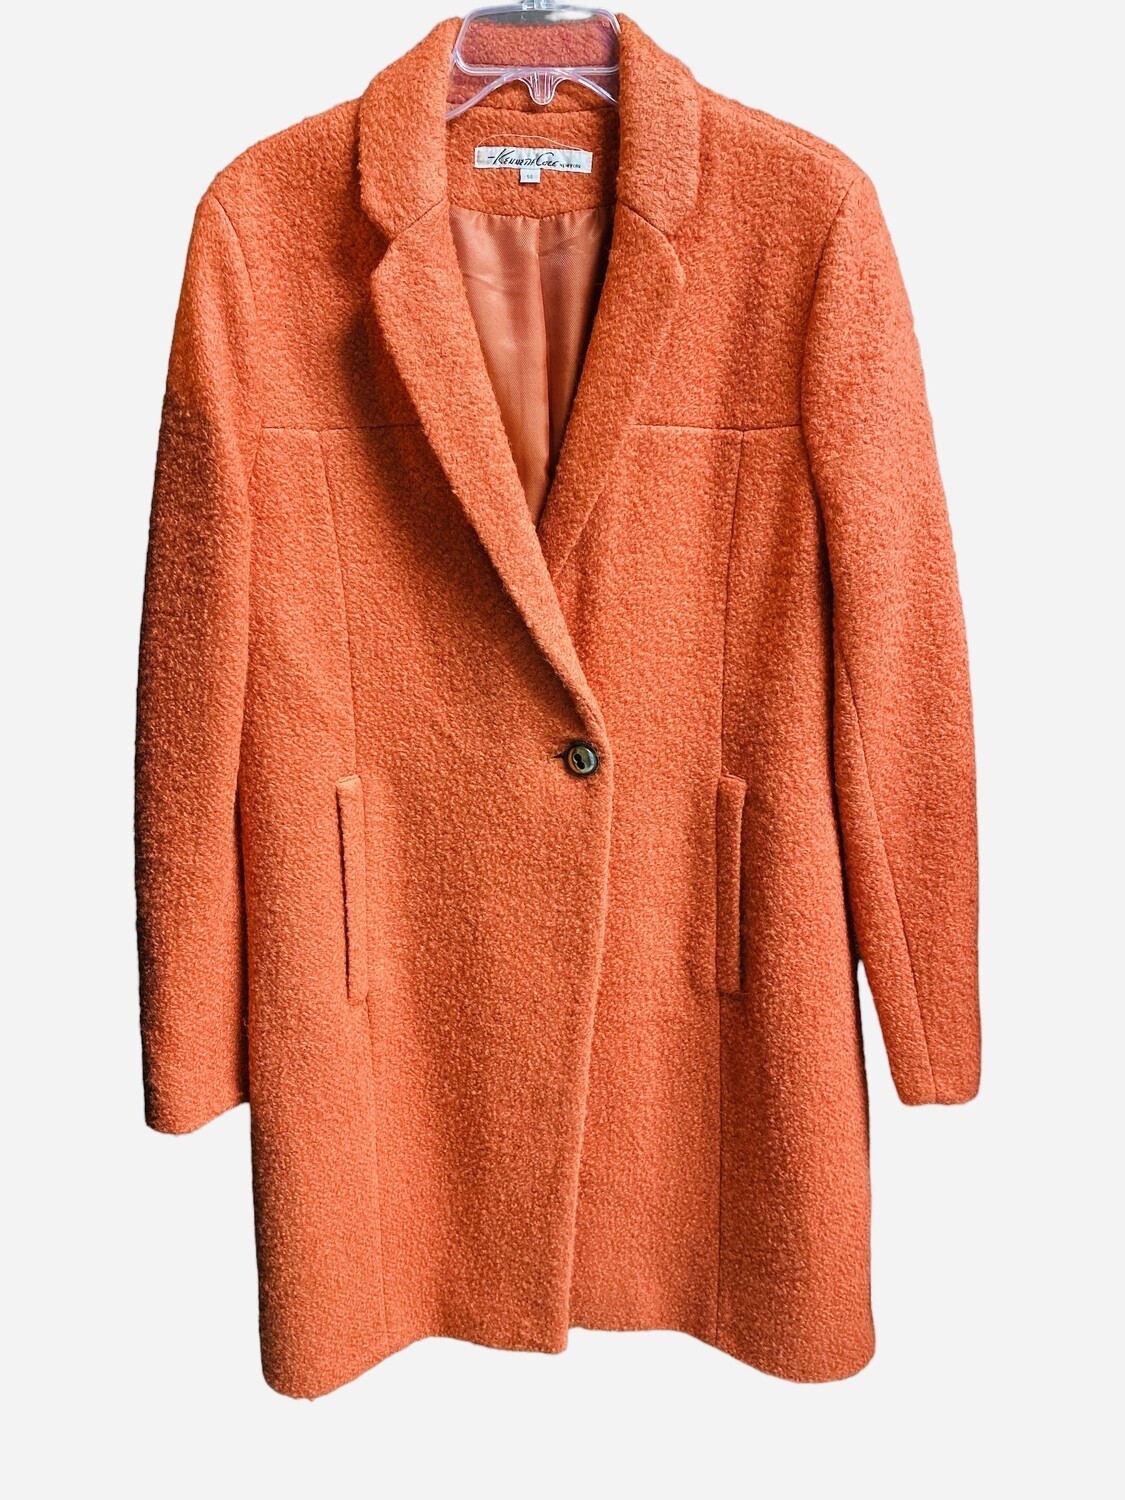 NEW Kenneth Cole Boiled Wool Orange Over Coat $198